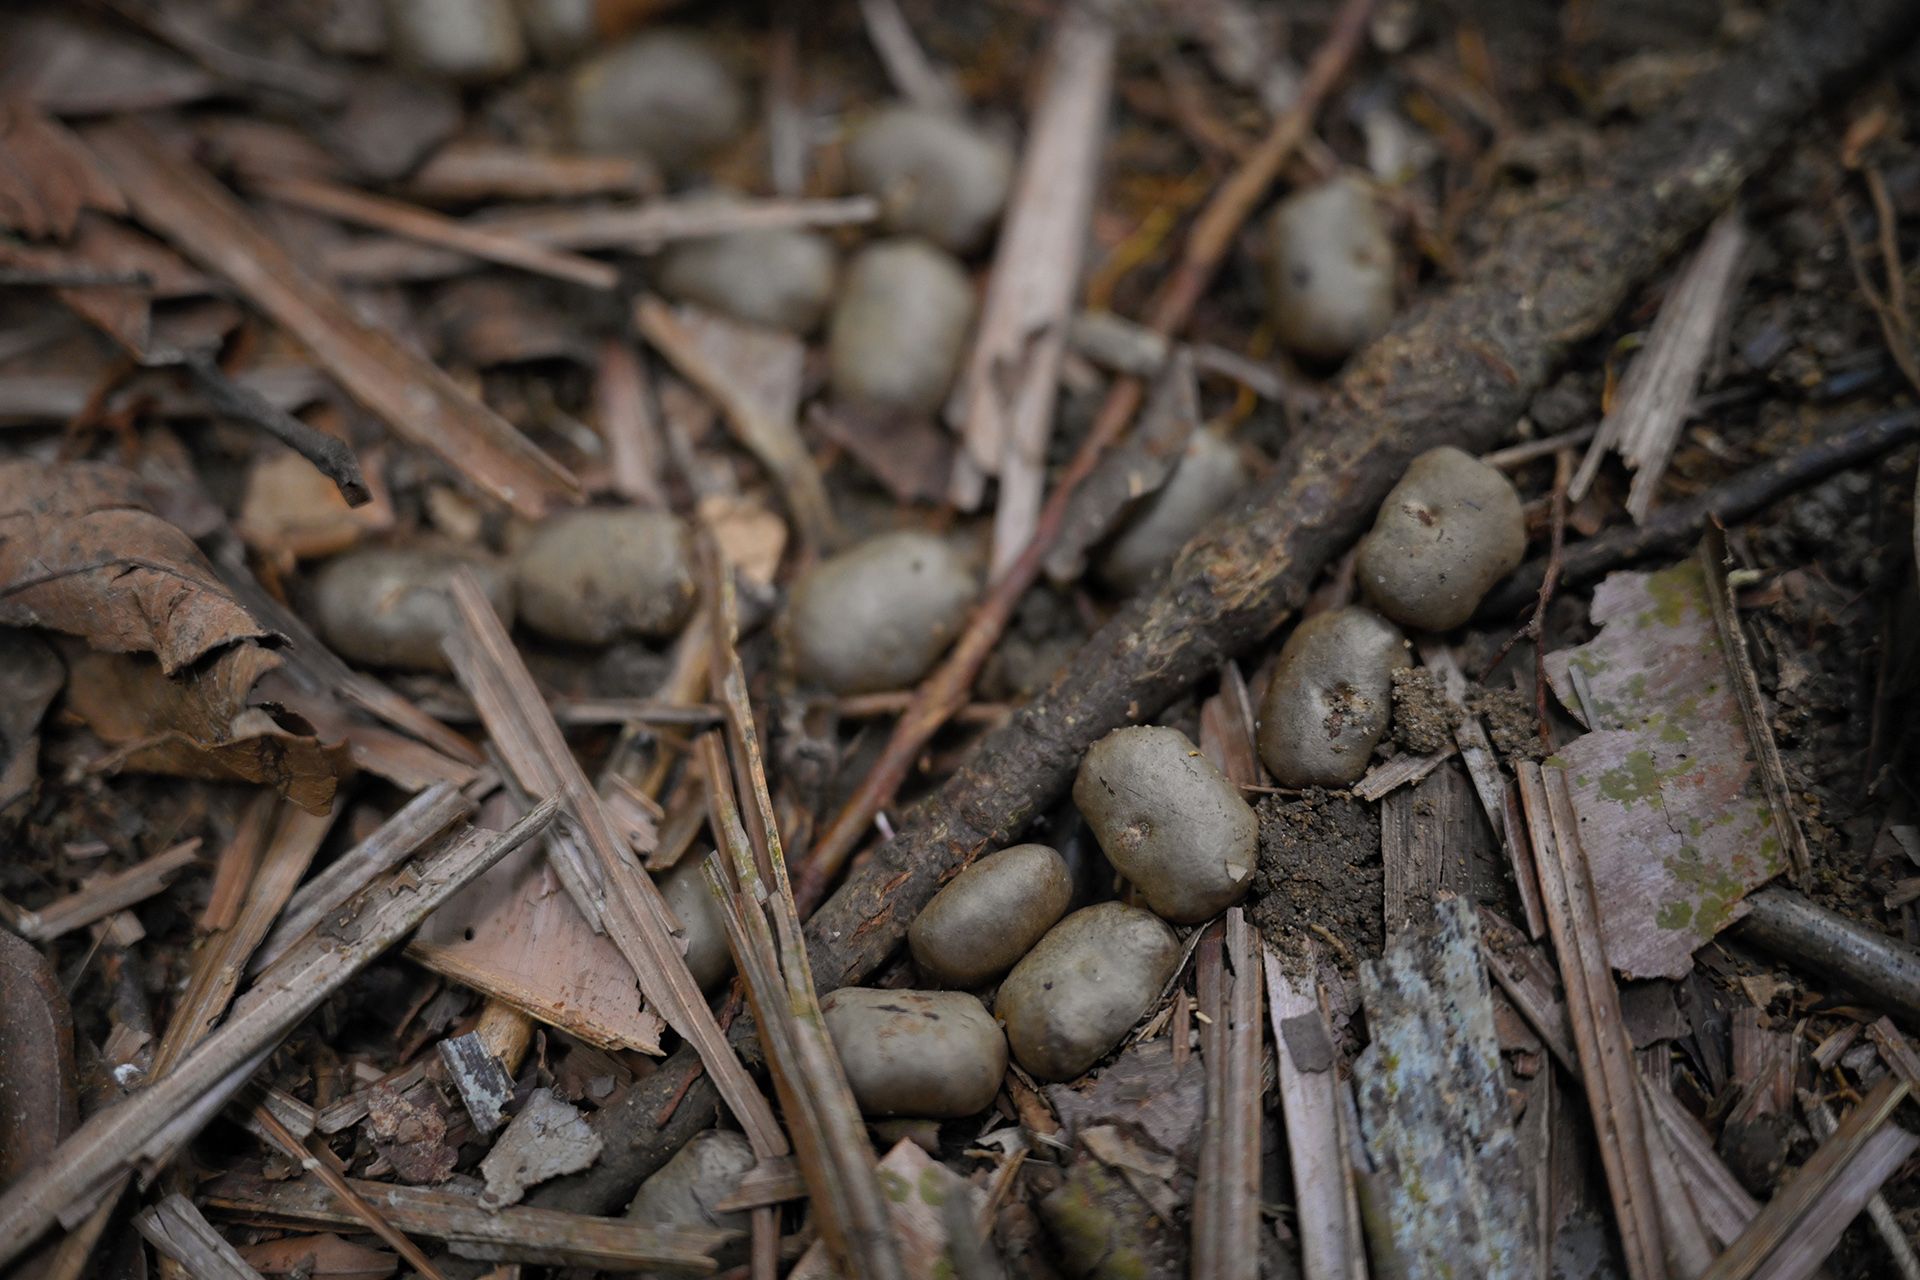 Civet poop containing seeds of a rattan plant, seen on the way to one of Ms Fung’s field sites in the Central Catchment Nature Reserve.